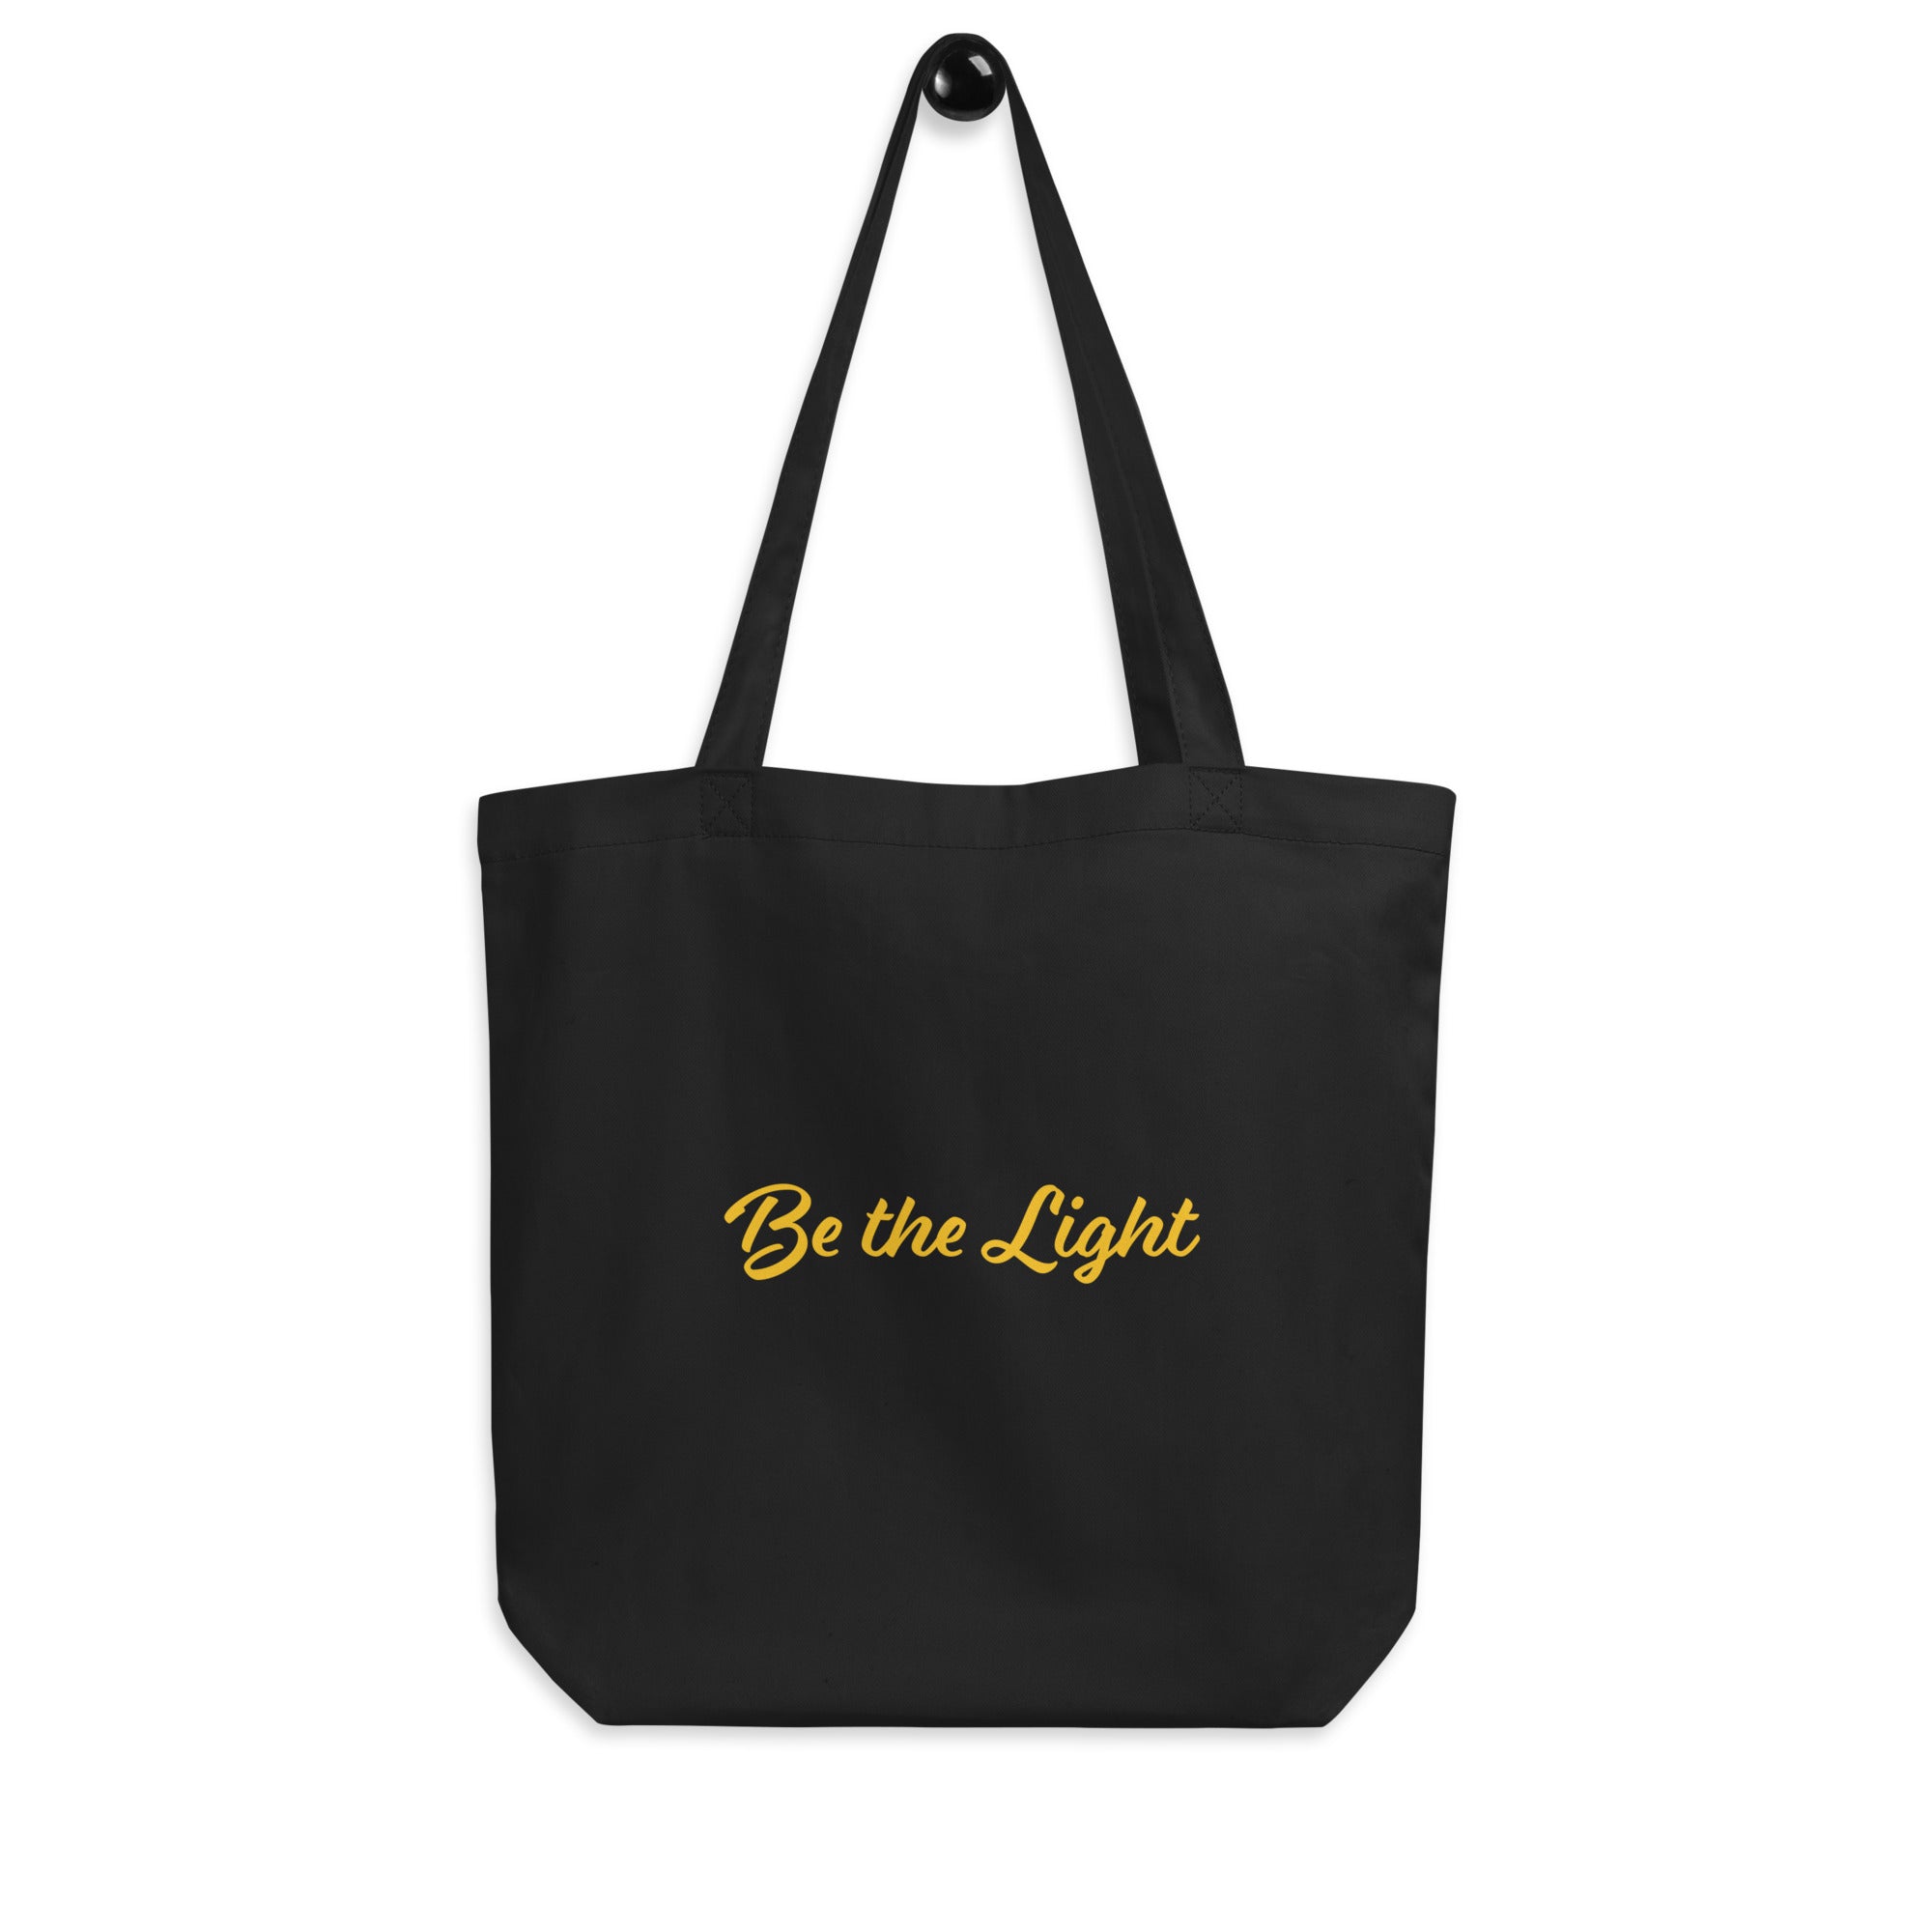 Let There Be Light Eco-Tote Bag